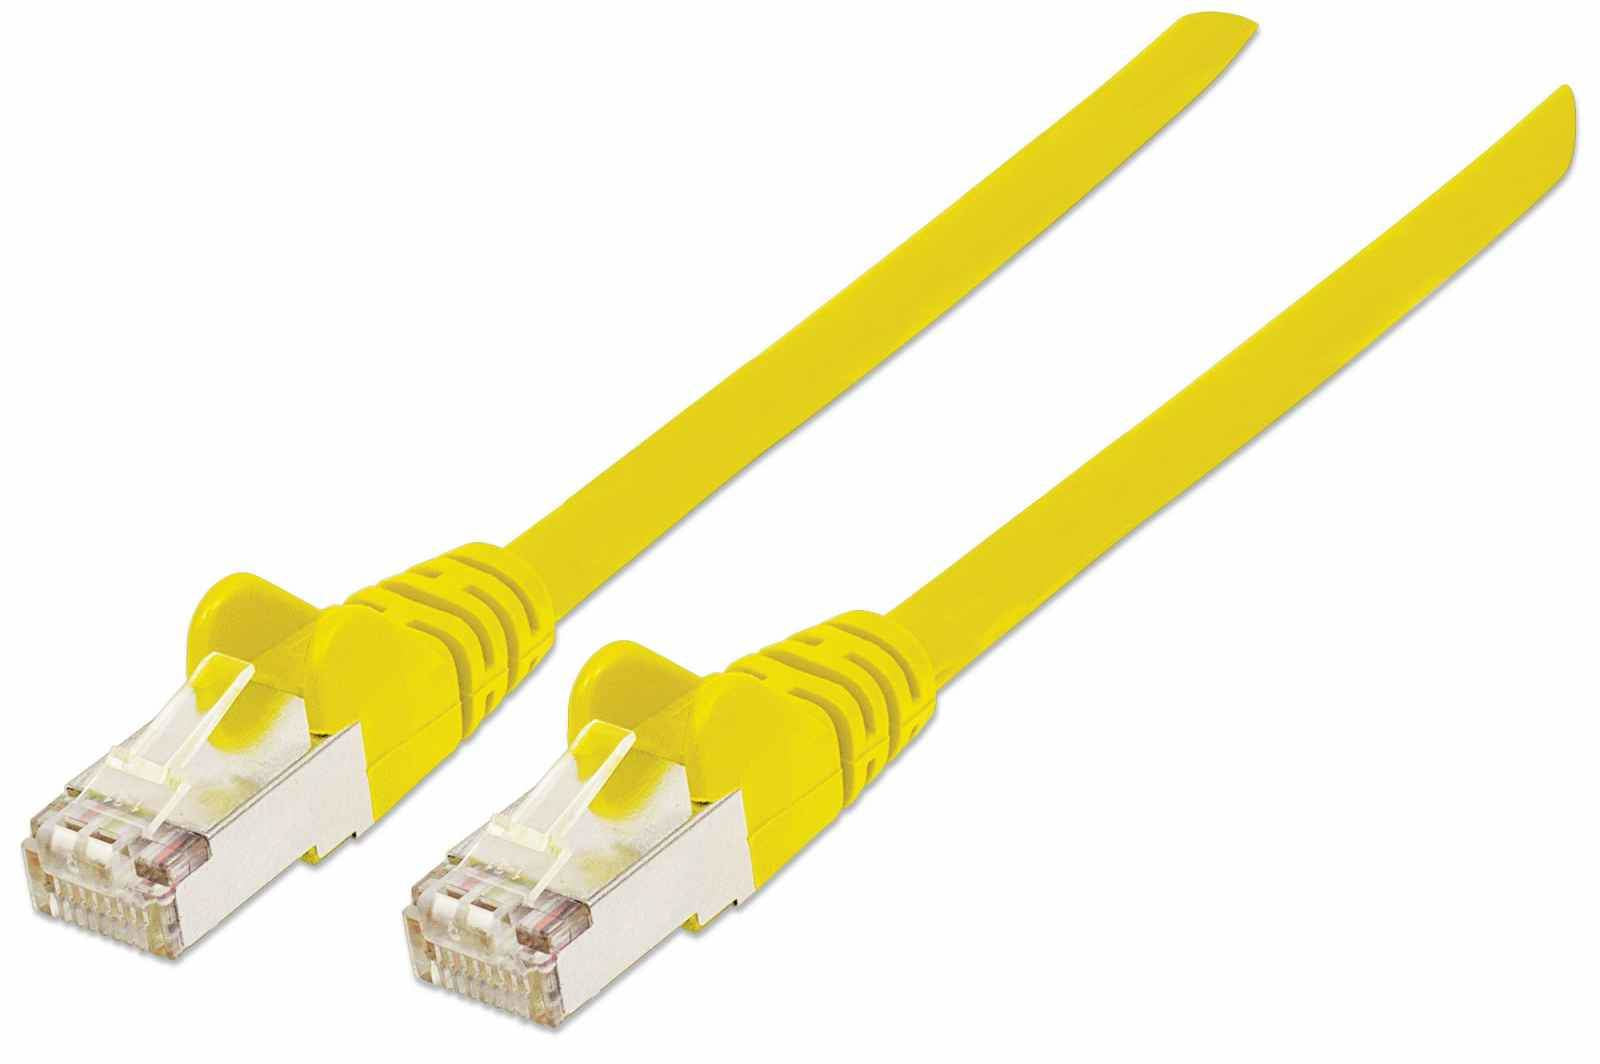 Intellinet Network Patch Cable, Cat7 Cable/Cat6A Plugs, 2m, Yellow, Copper, S/FTP, LSOH / LSZH, PVC, RJ45, Gold Plated Contacts, Snagless, Booted, Lifetime Warranty, Polybag